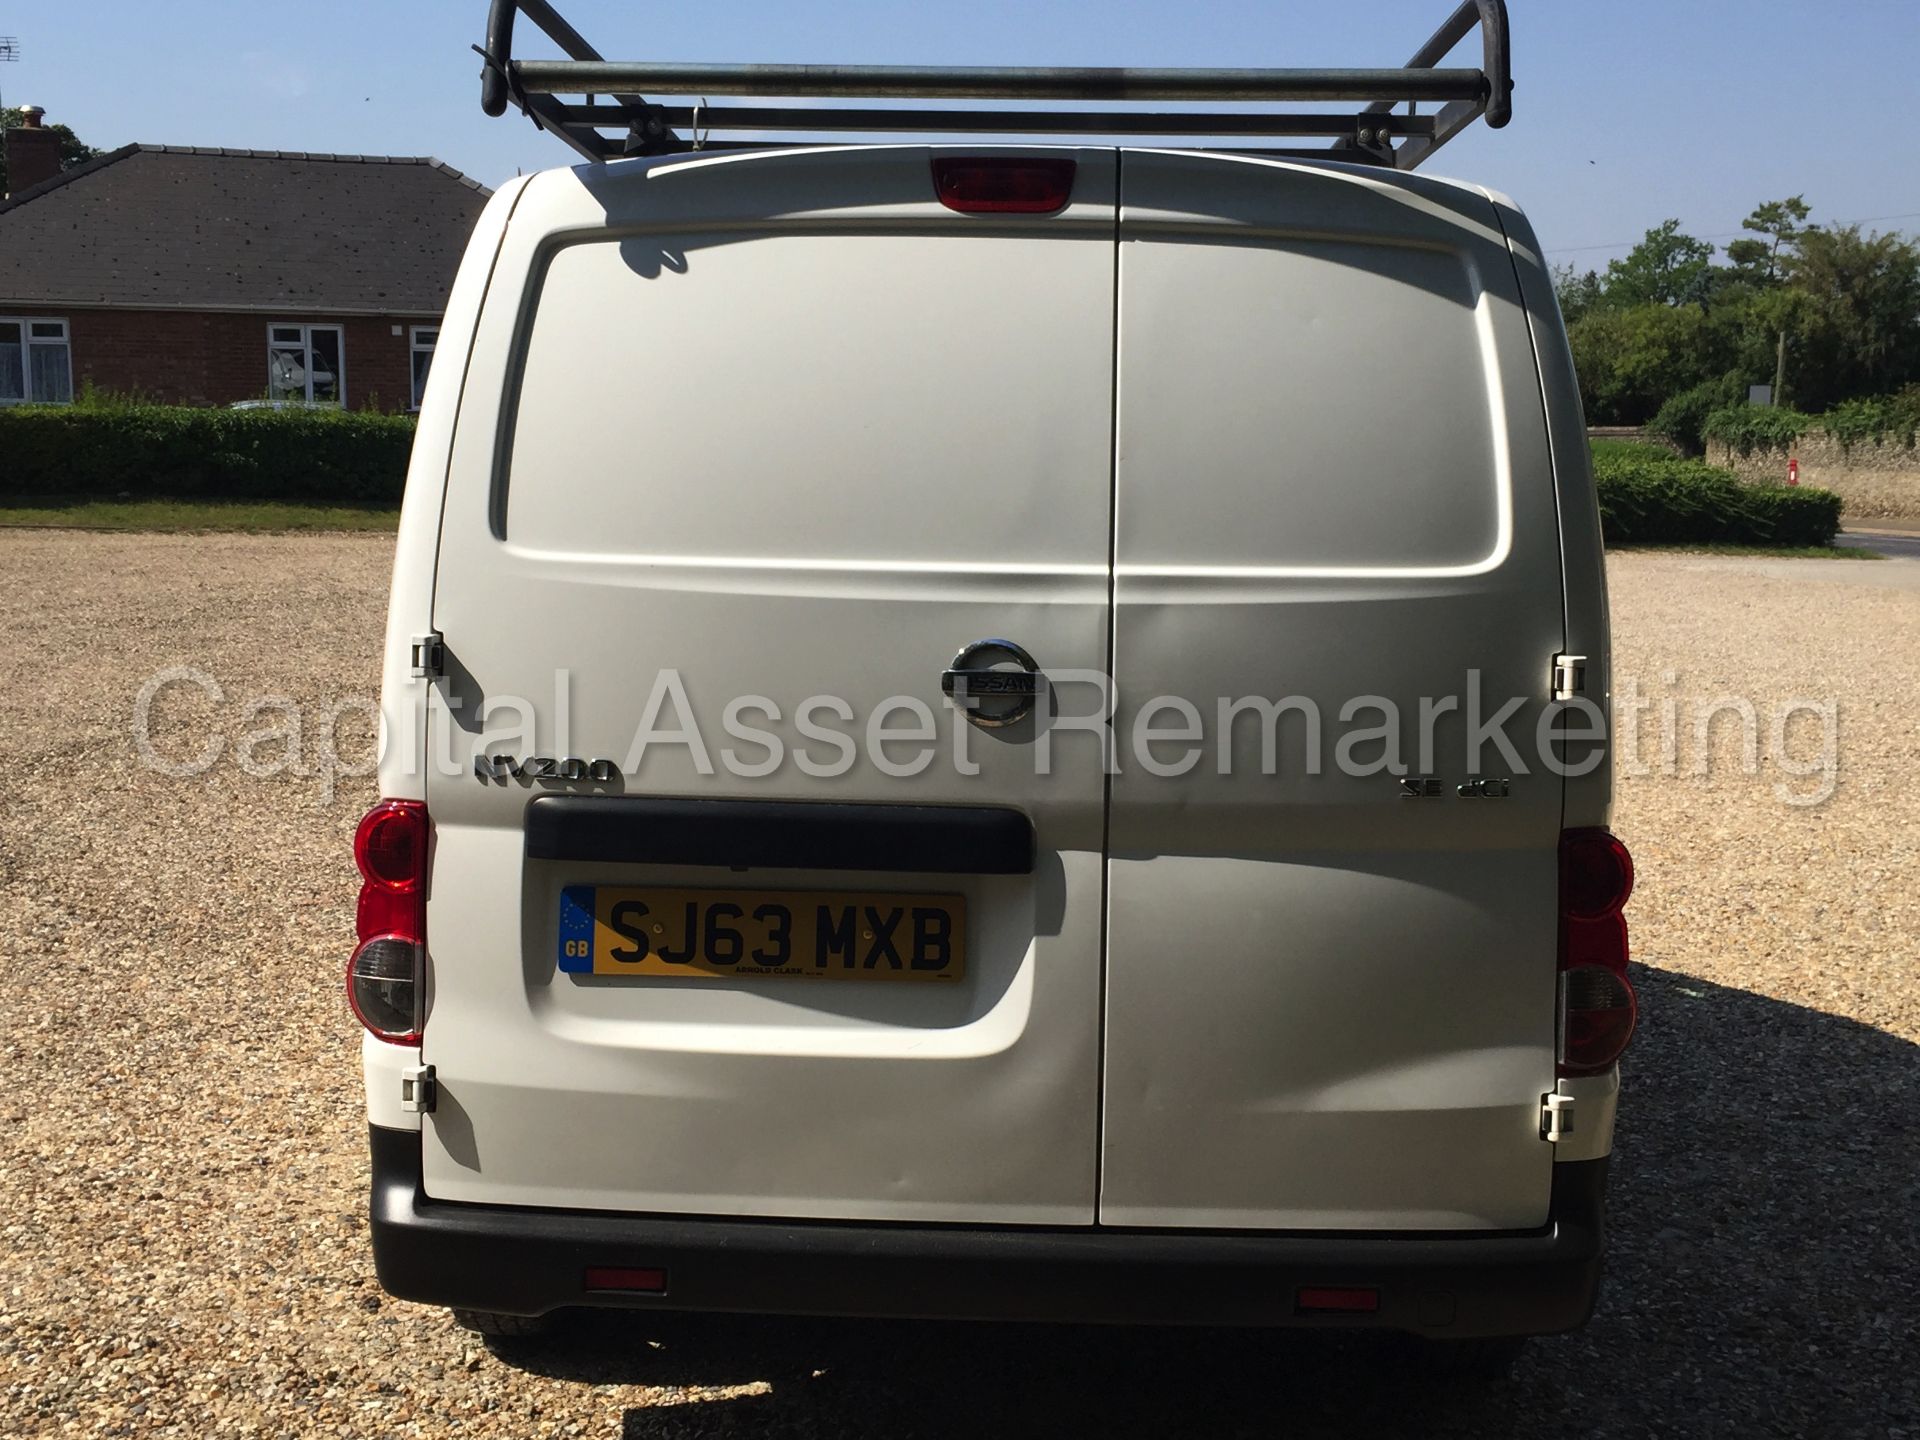 (On Sale) NISSAN NV200 'SE' (2014 MODEL) '1.5 DCI' (1 COMPANY OWNER FROM NEW - FULL SERVICE HISTORY) - Image 4 of 21